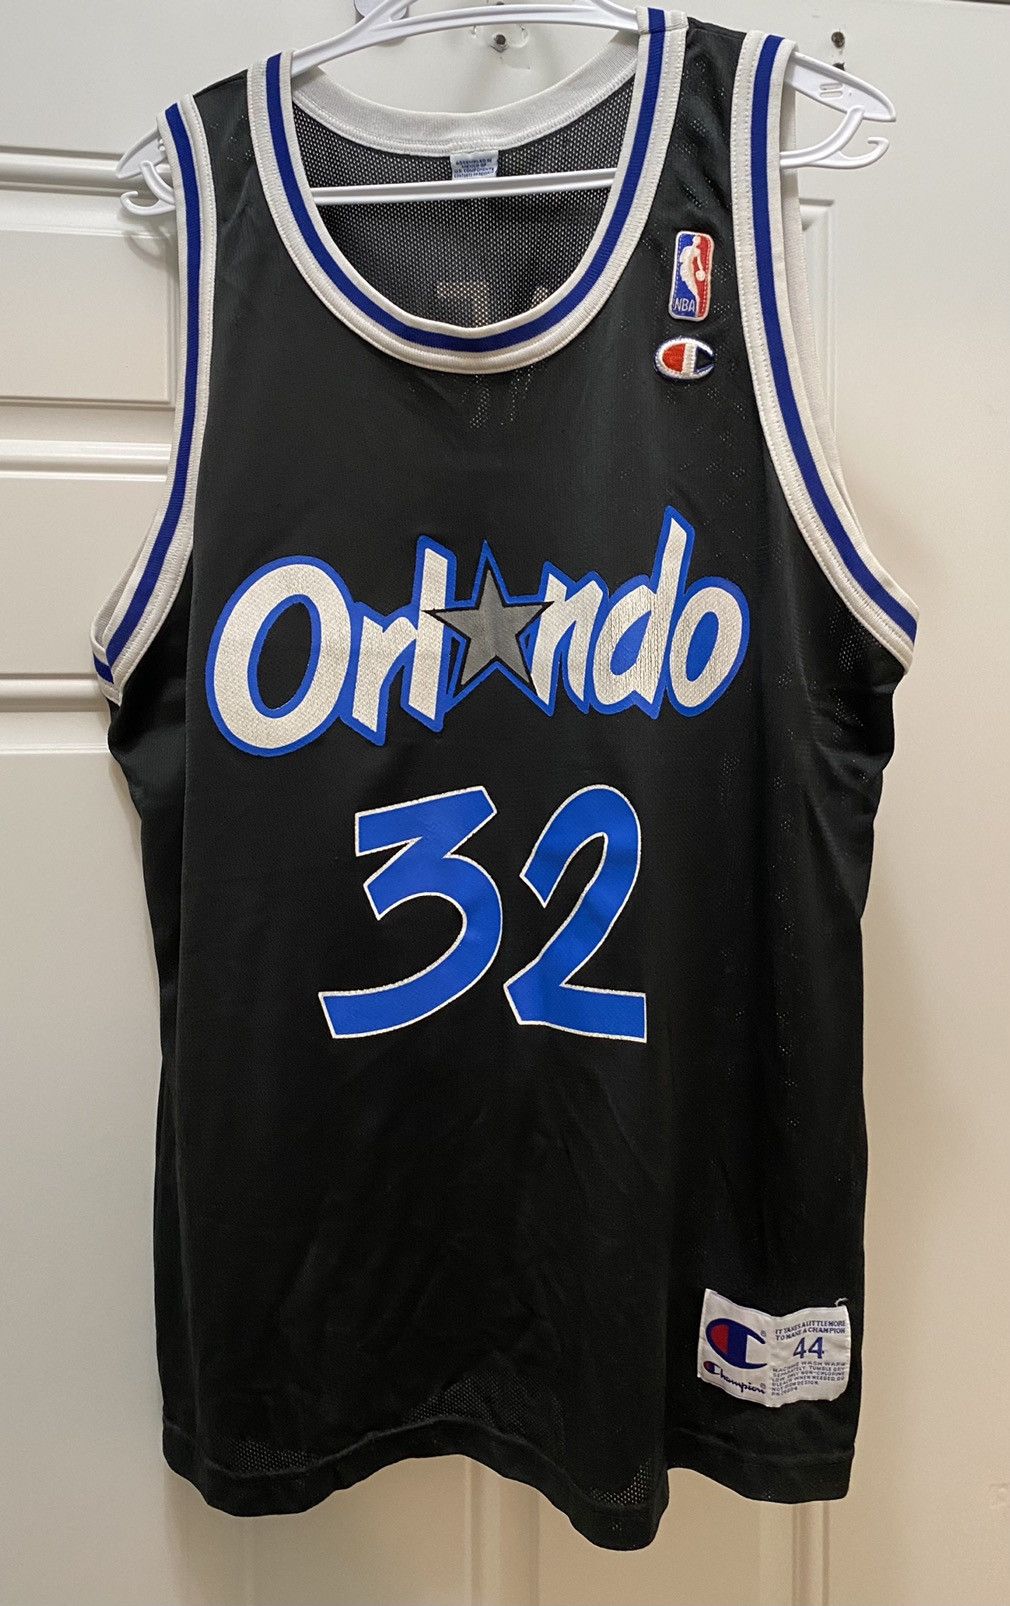 Shaquille O' Neal - 2pac sporting my Orlando jersey #throwback #tupac #tbt